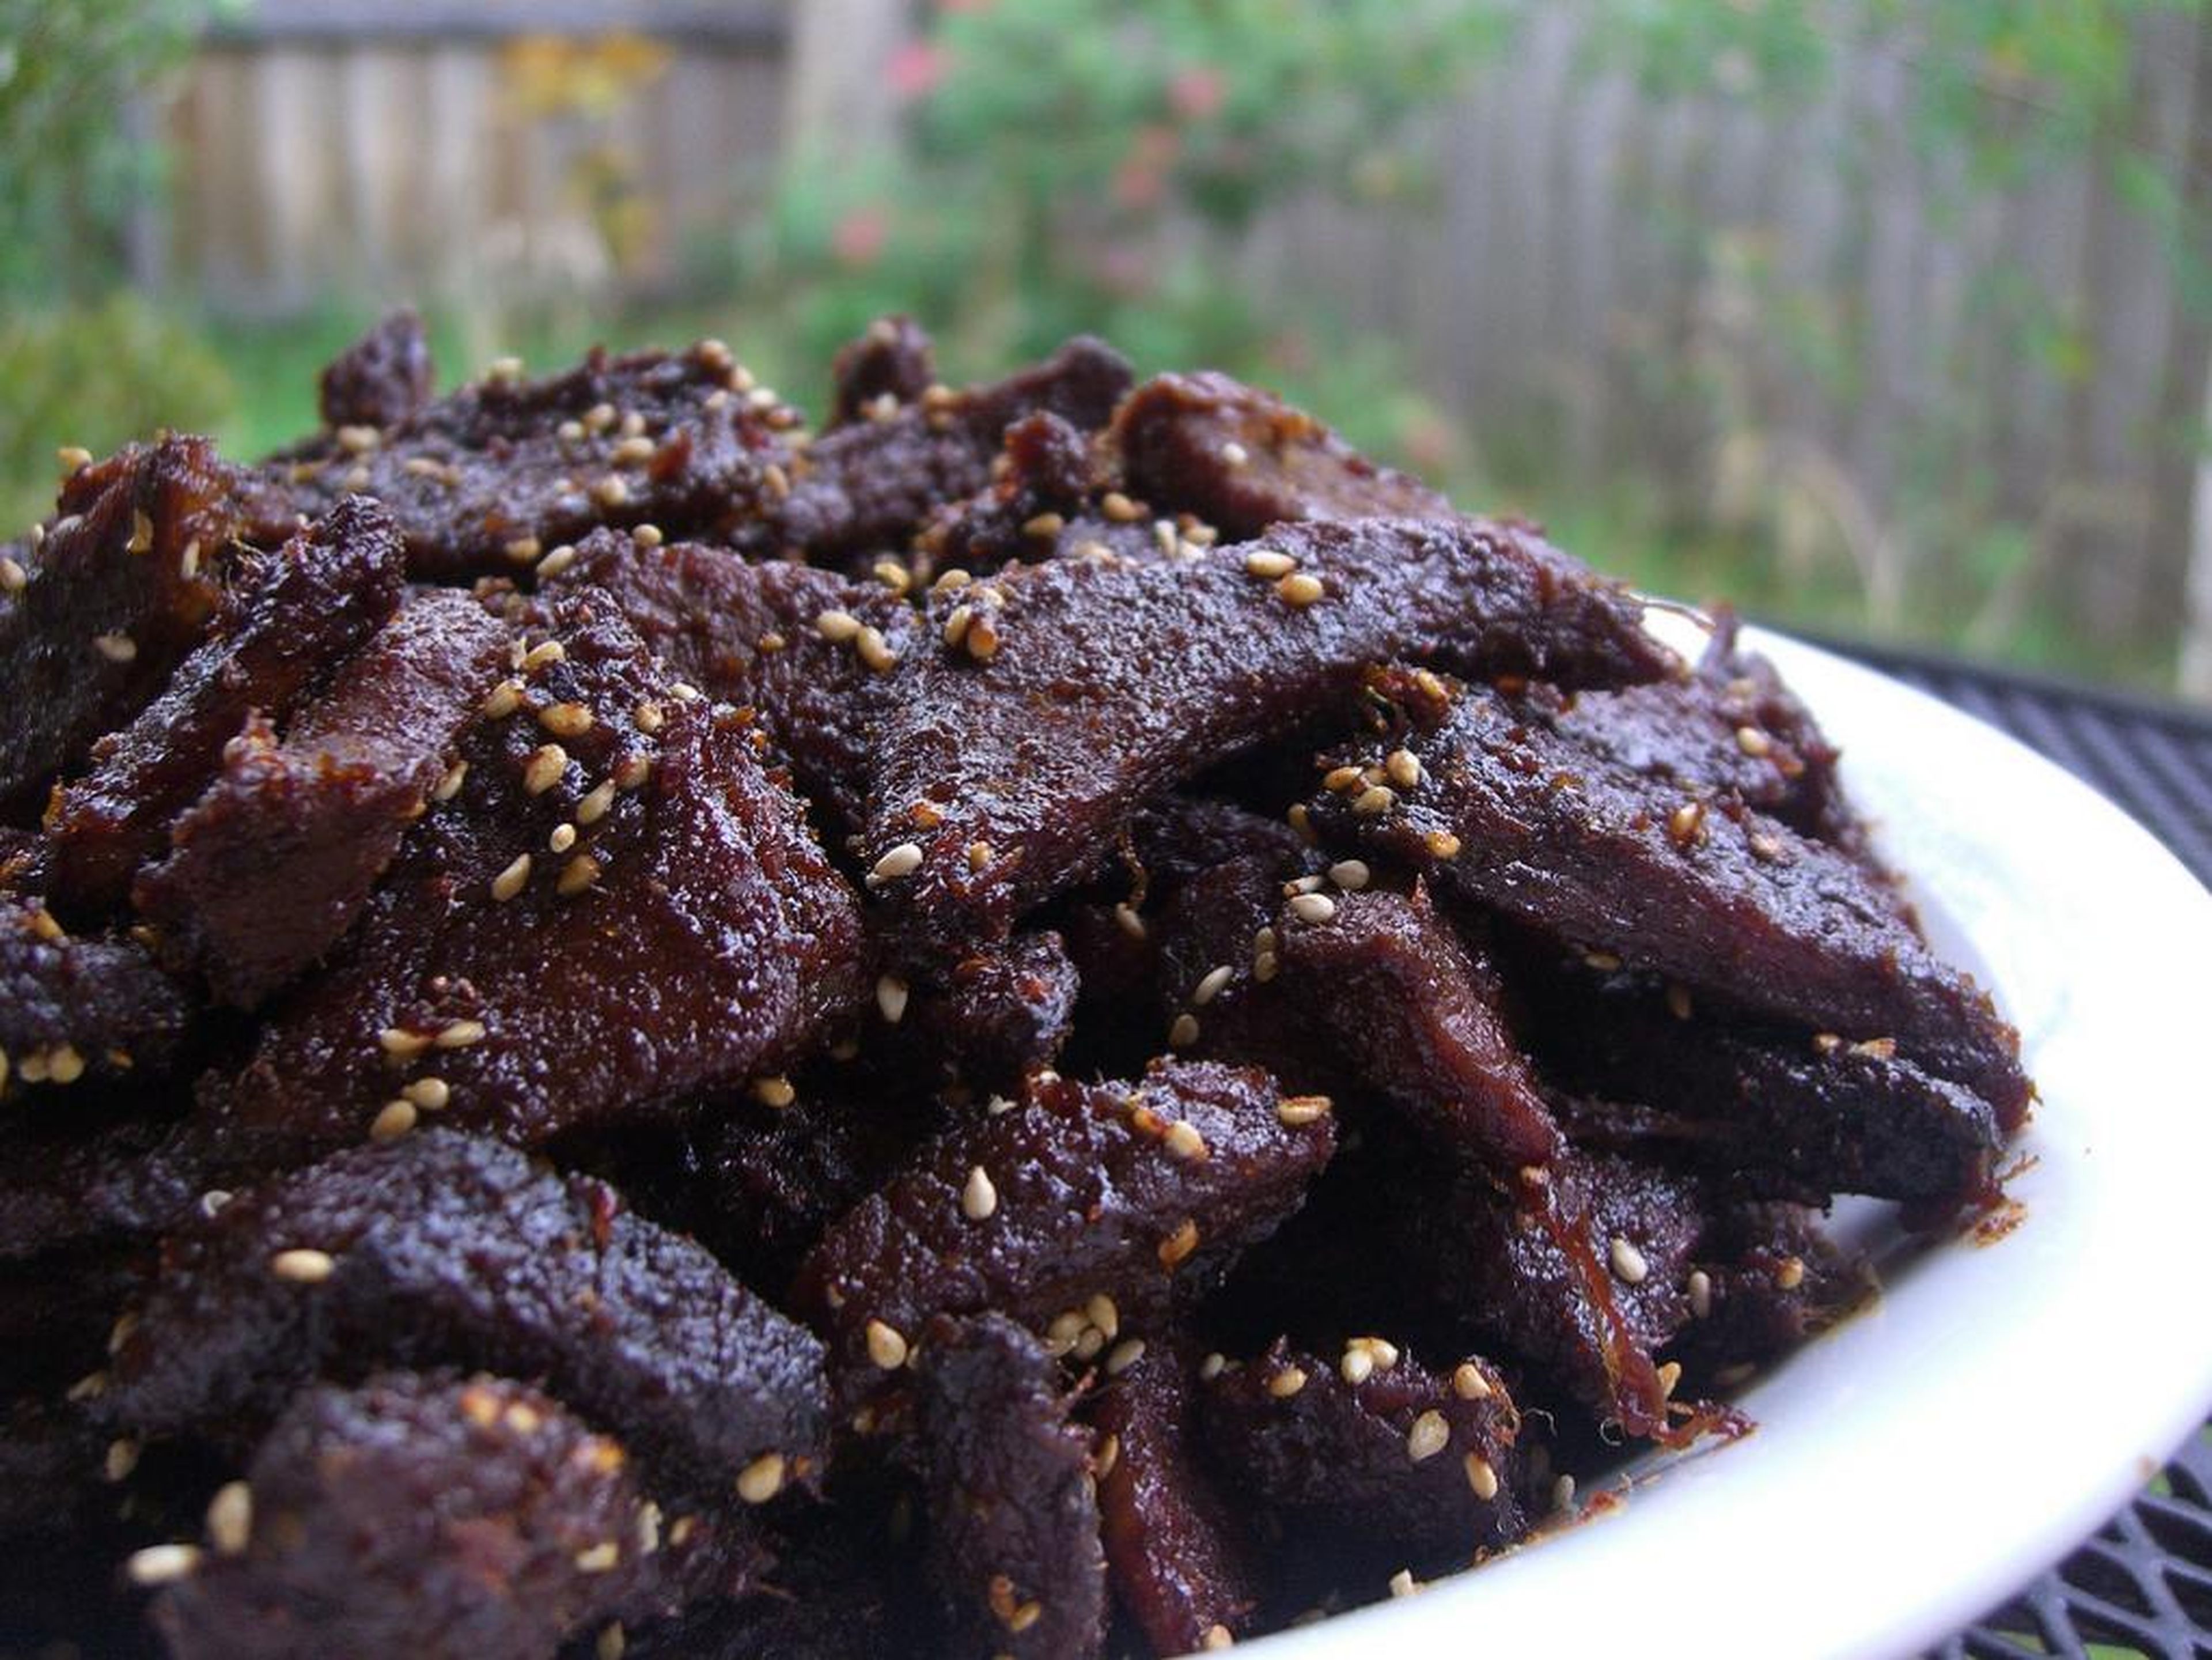 Beef jerky comes in many flavors.